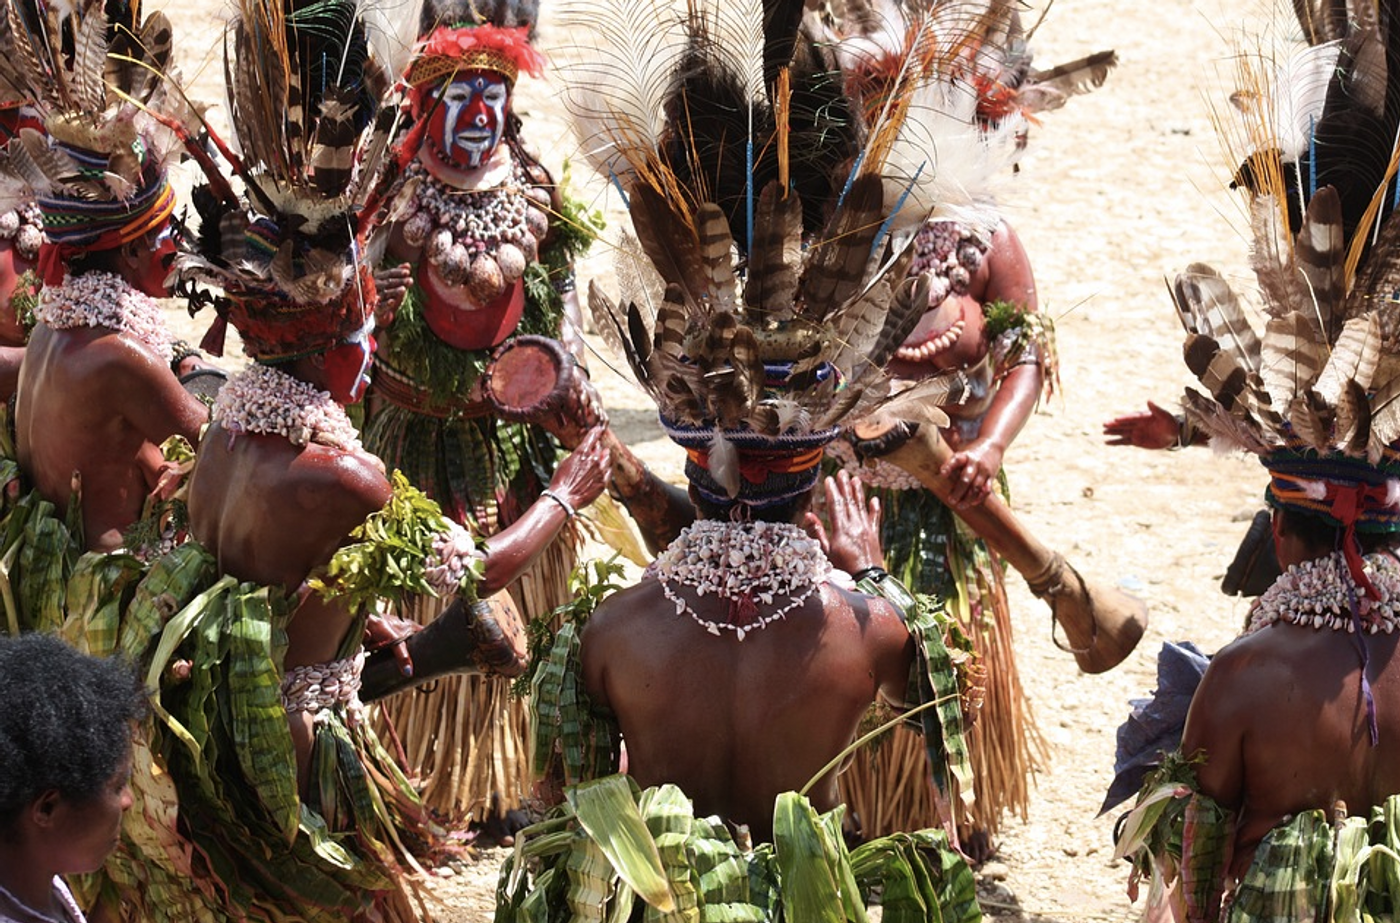 A tribe from the highlands of Papua New Guinea / Credit: Pixabay